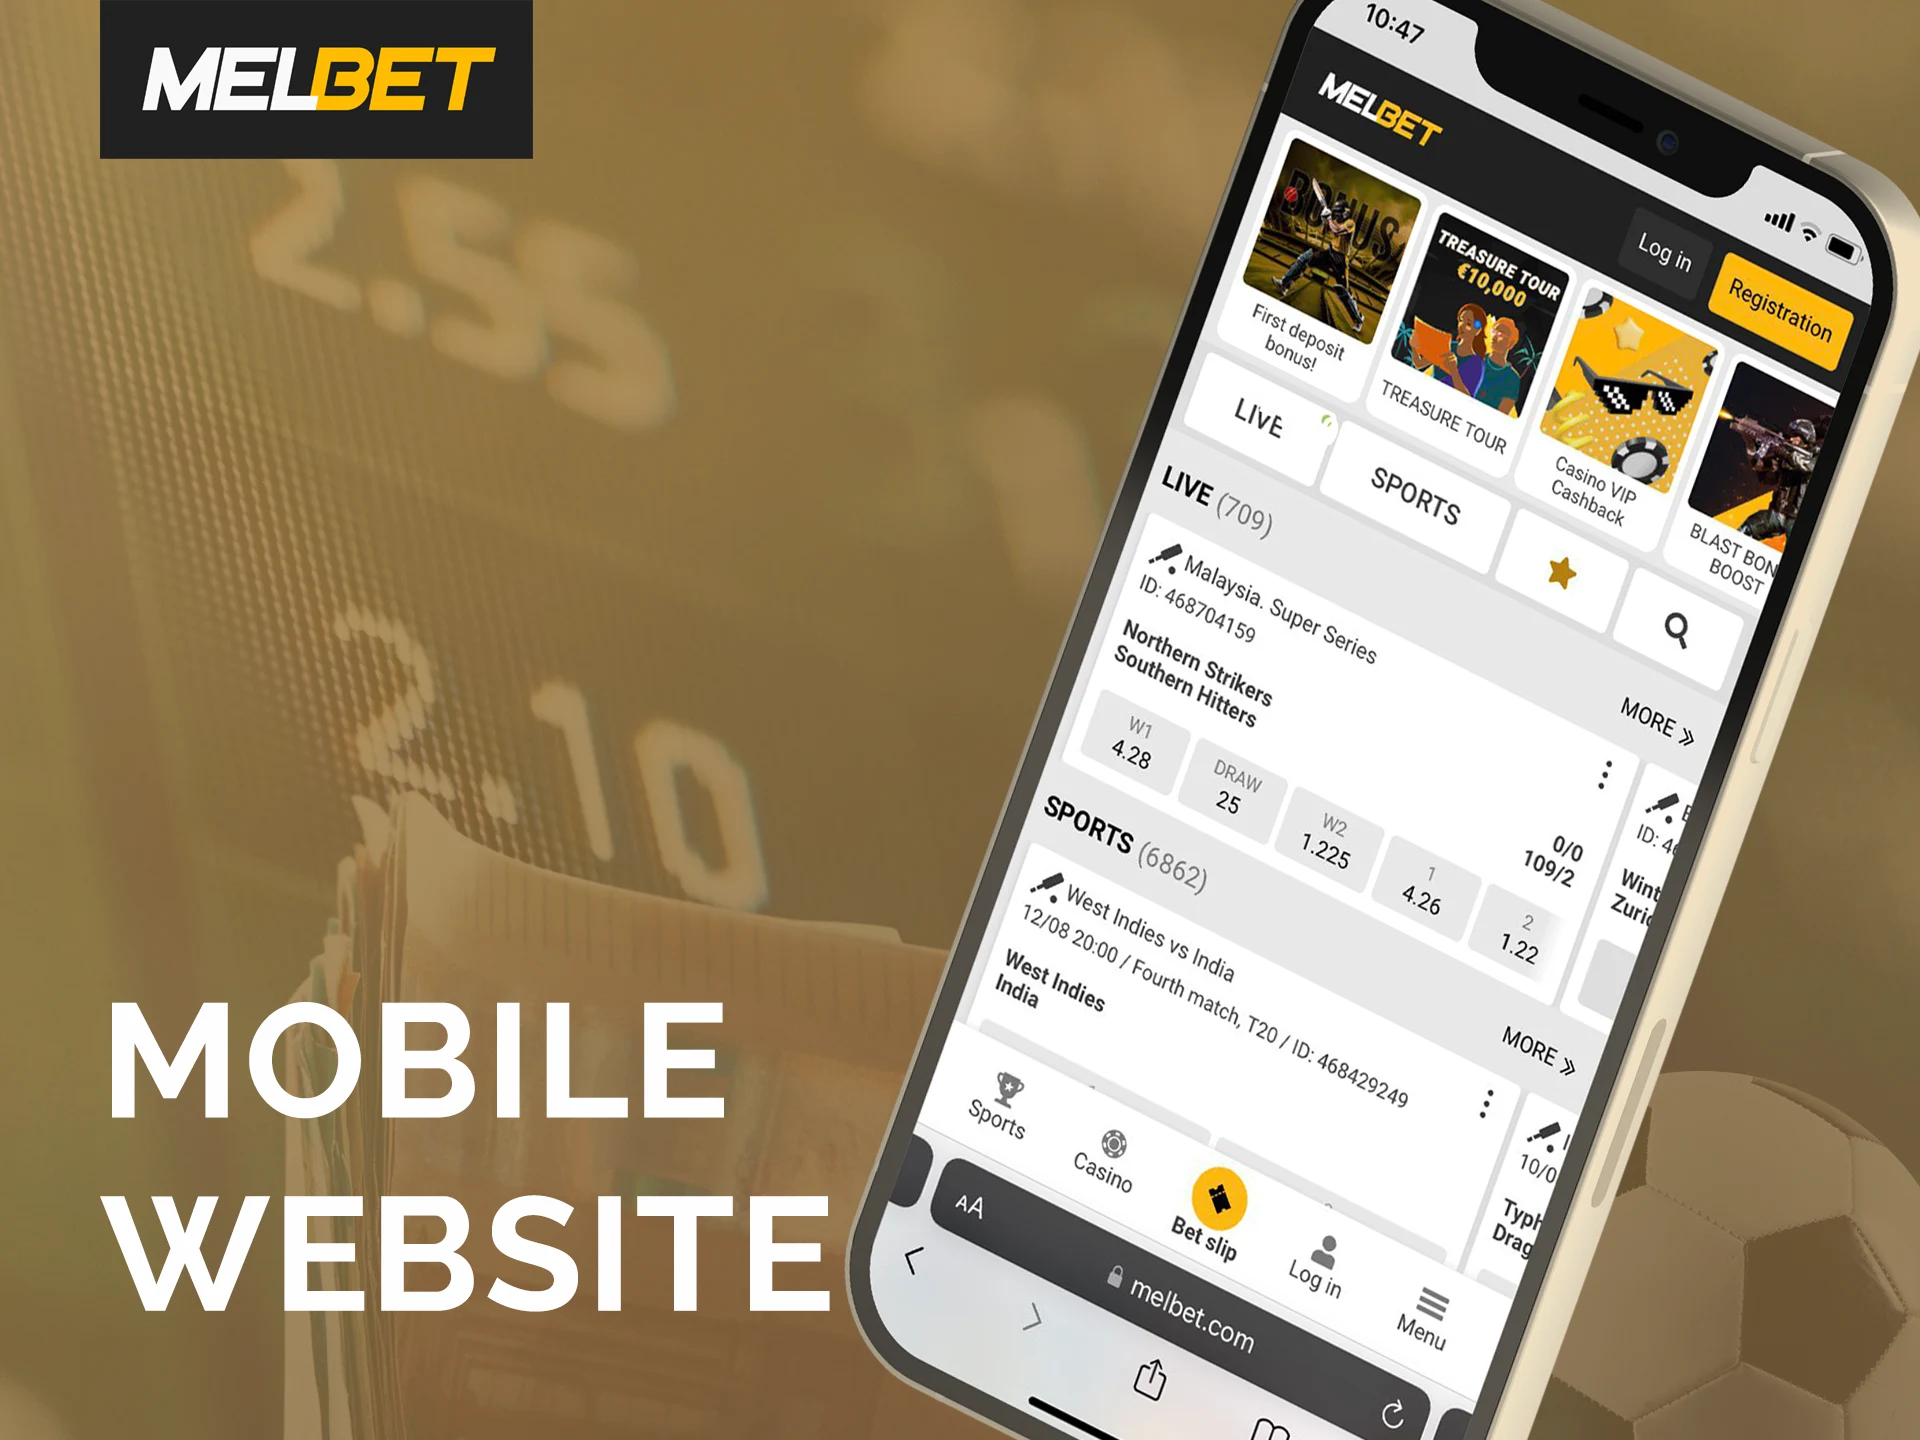 Melbet's mobile site offers the same functionality and convenience as the mobile app.